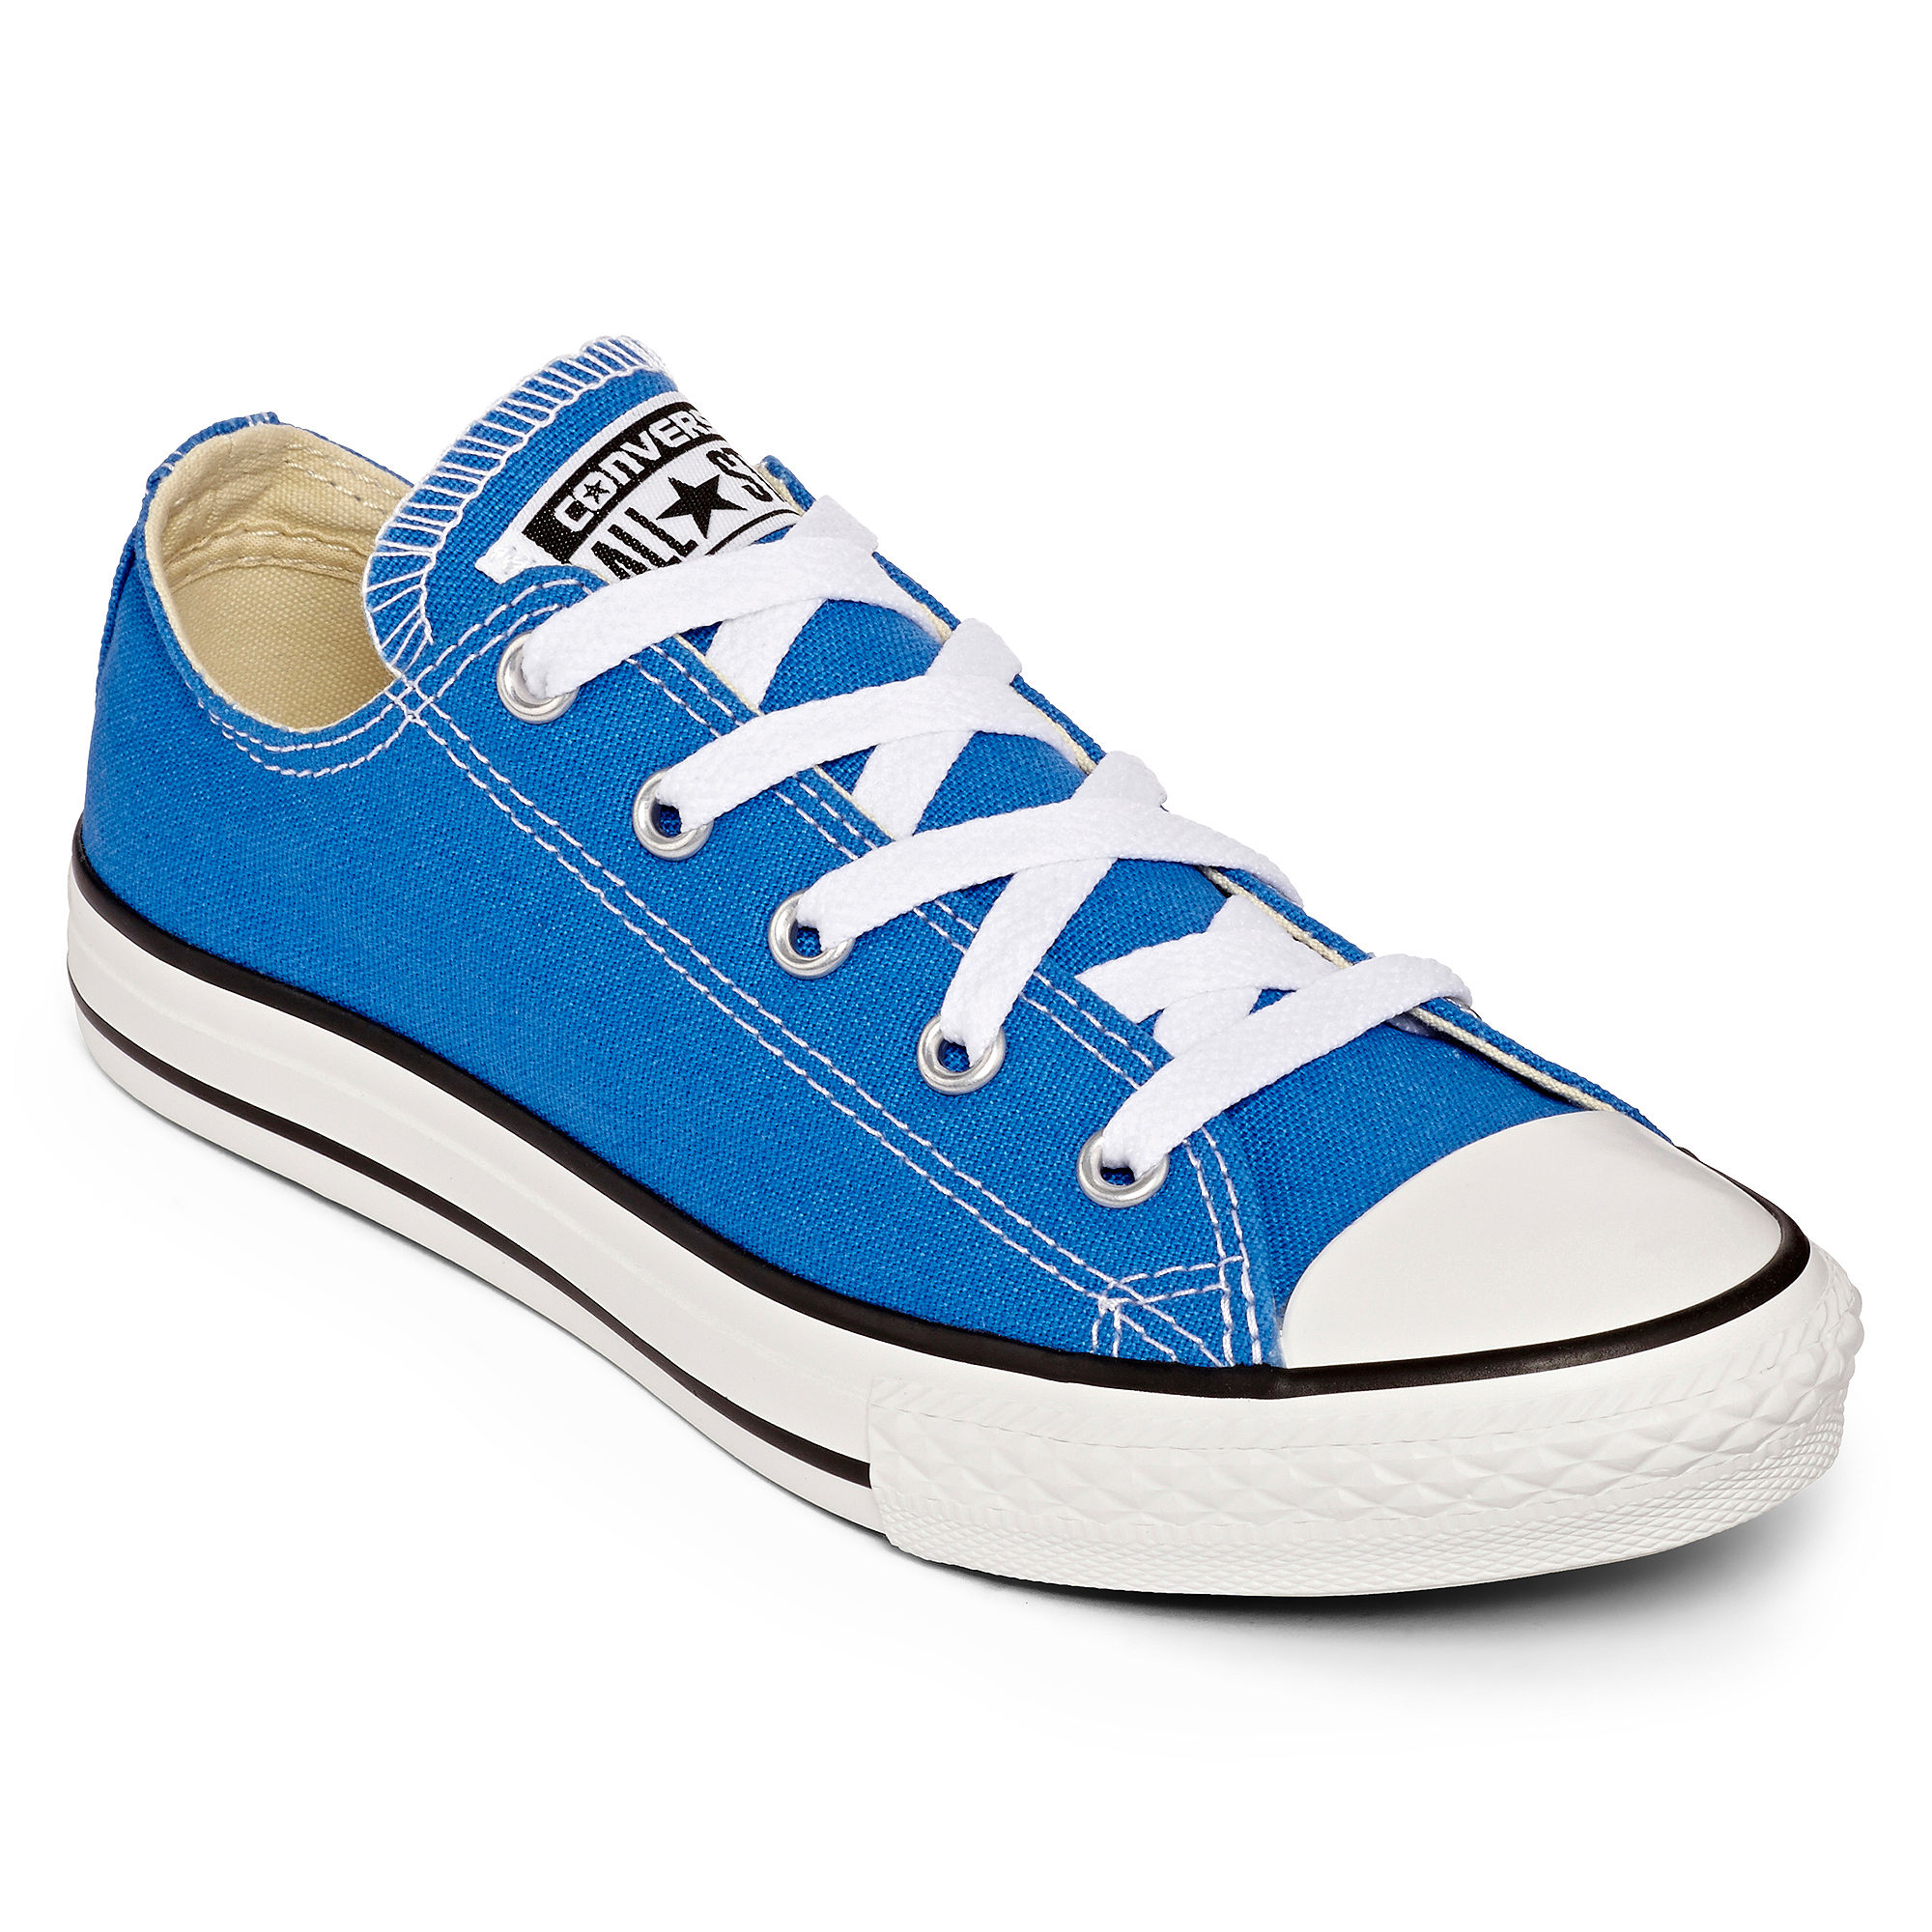 UPC 886955639263 product image for Converse Chuck Taylor All Star Boys Sneakers - Little Kids | upcitemdb.com